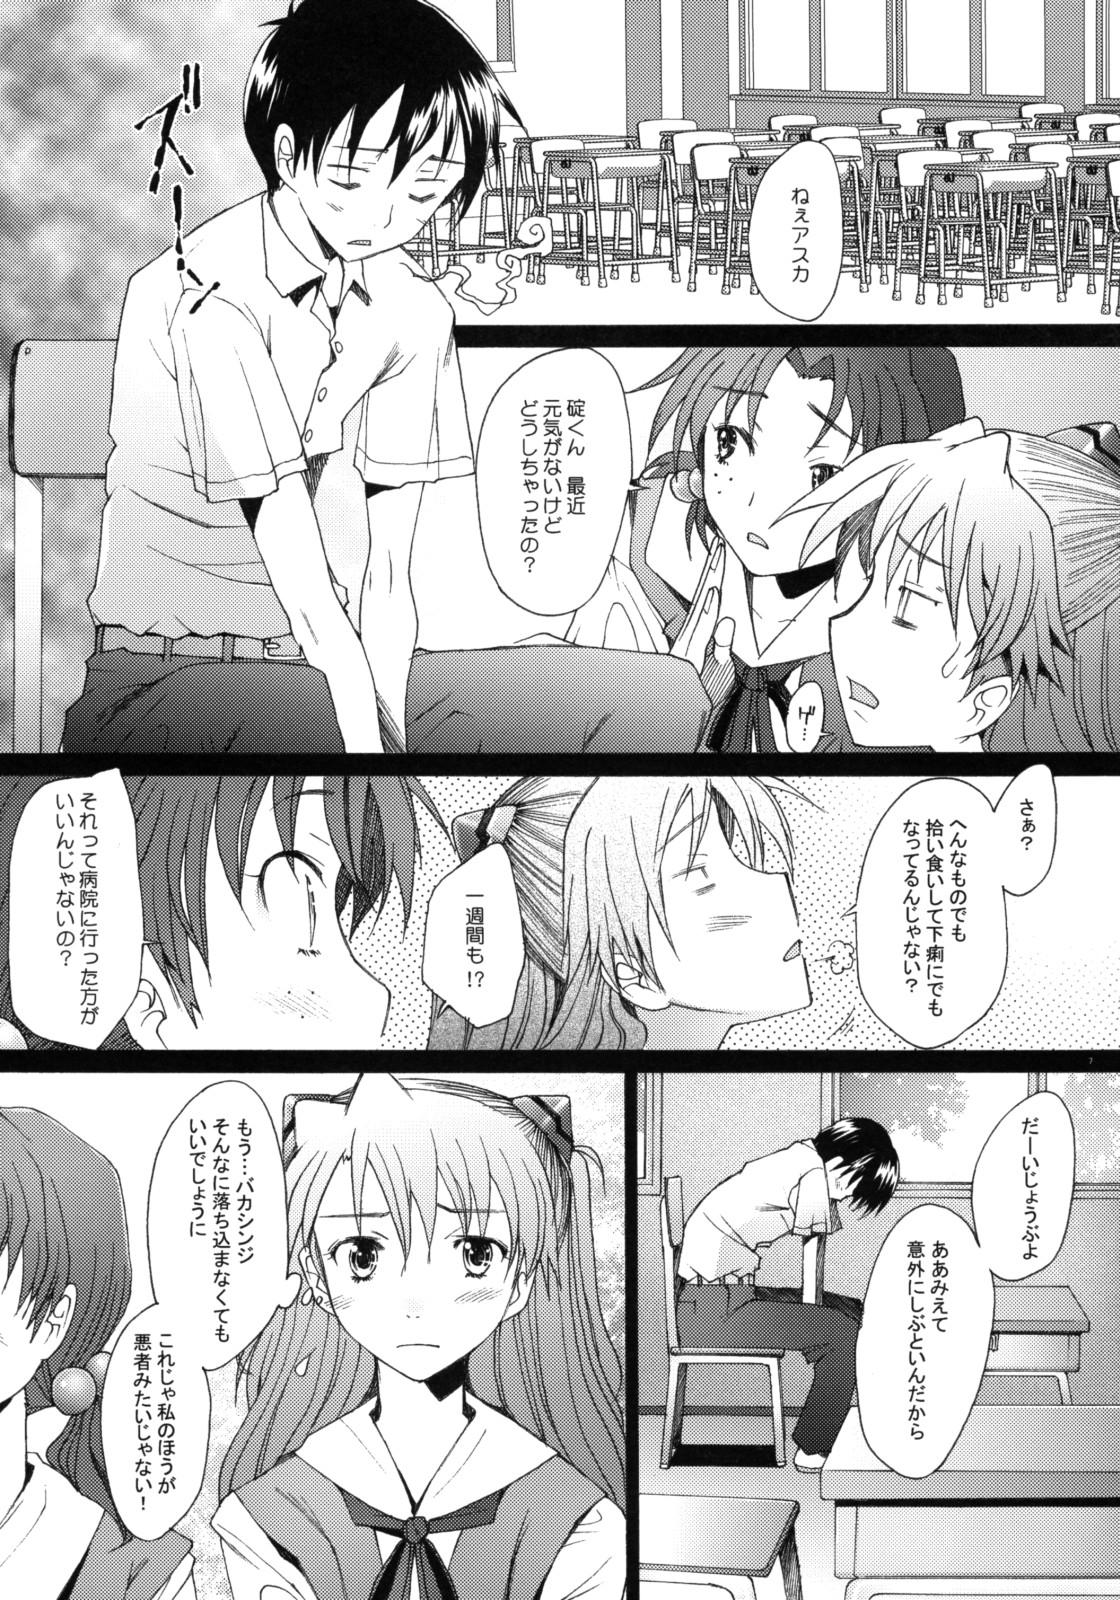 Gaping Confusion LEVEL A vol.2 - Neon genesis evangelion Three Some - Page 6